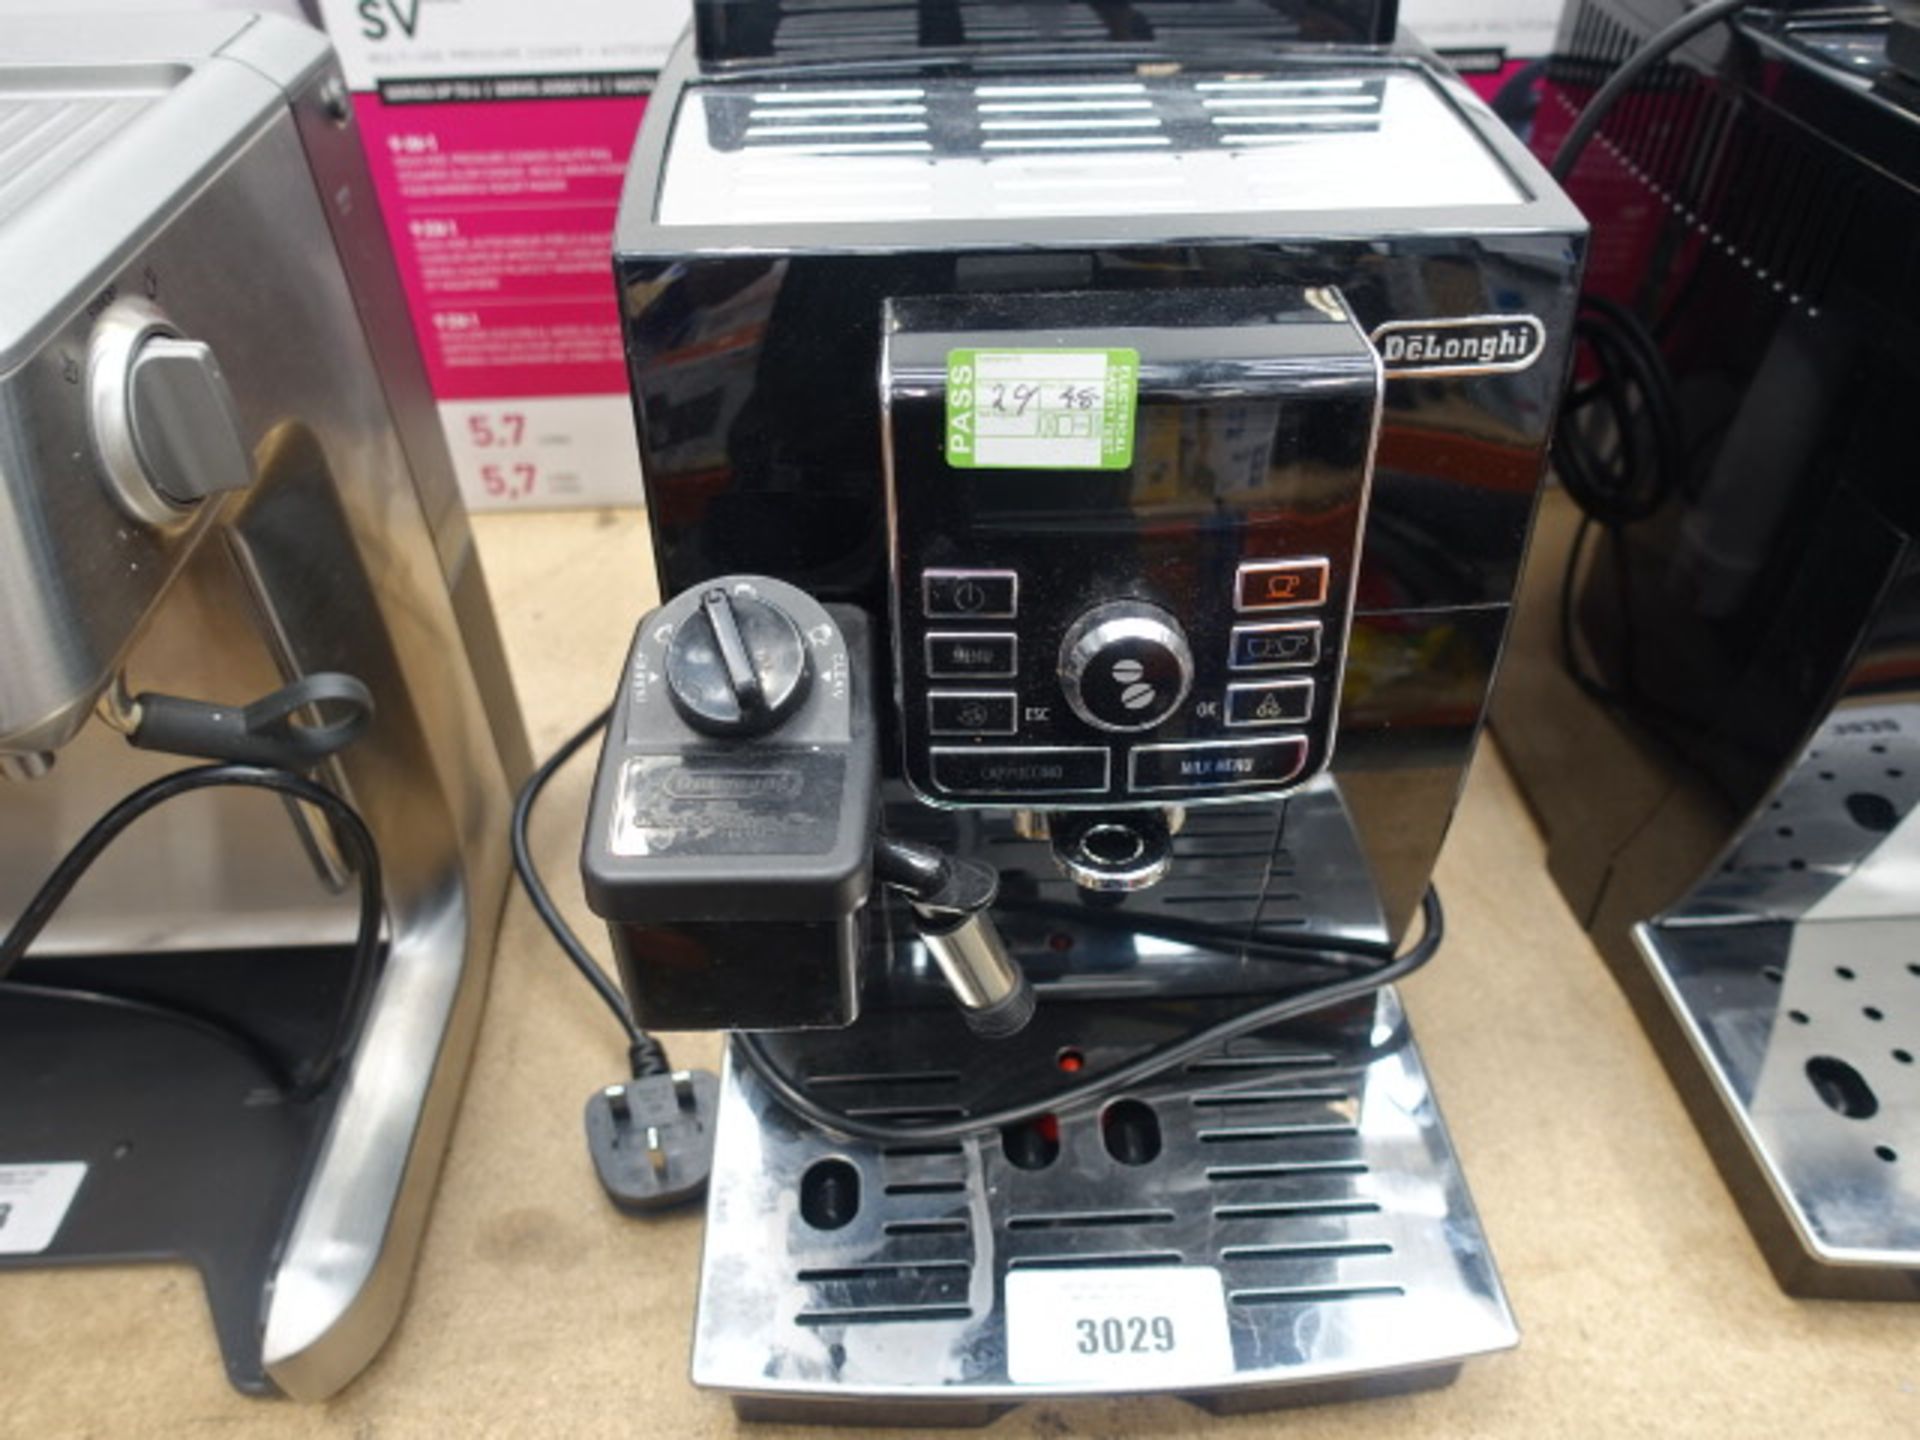 Unboxed Delonghi cappuccino coffee dispenser (machine only, no accessories)